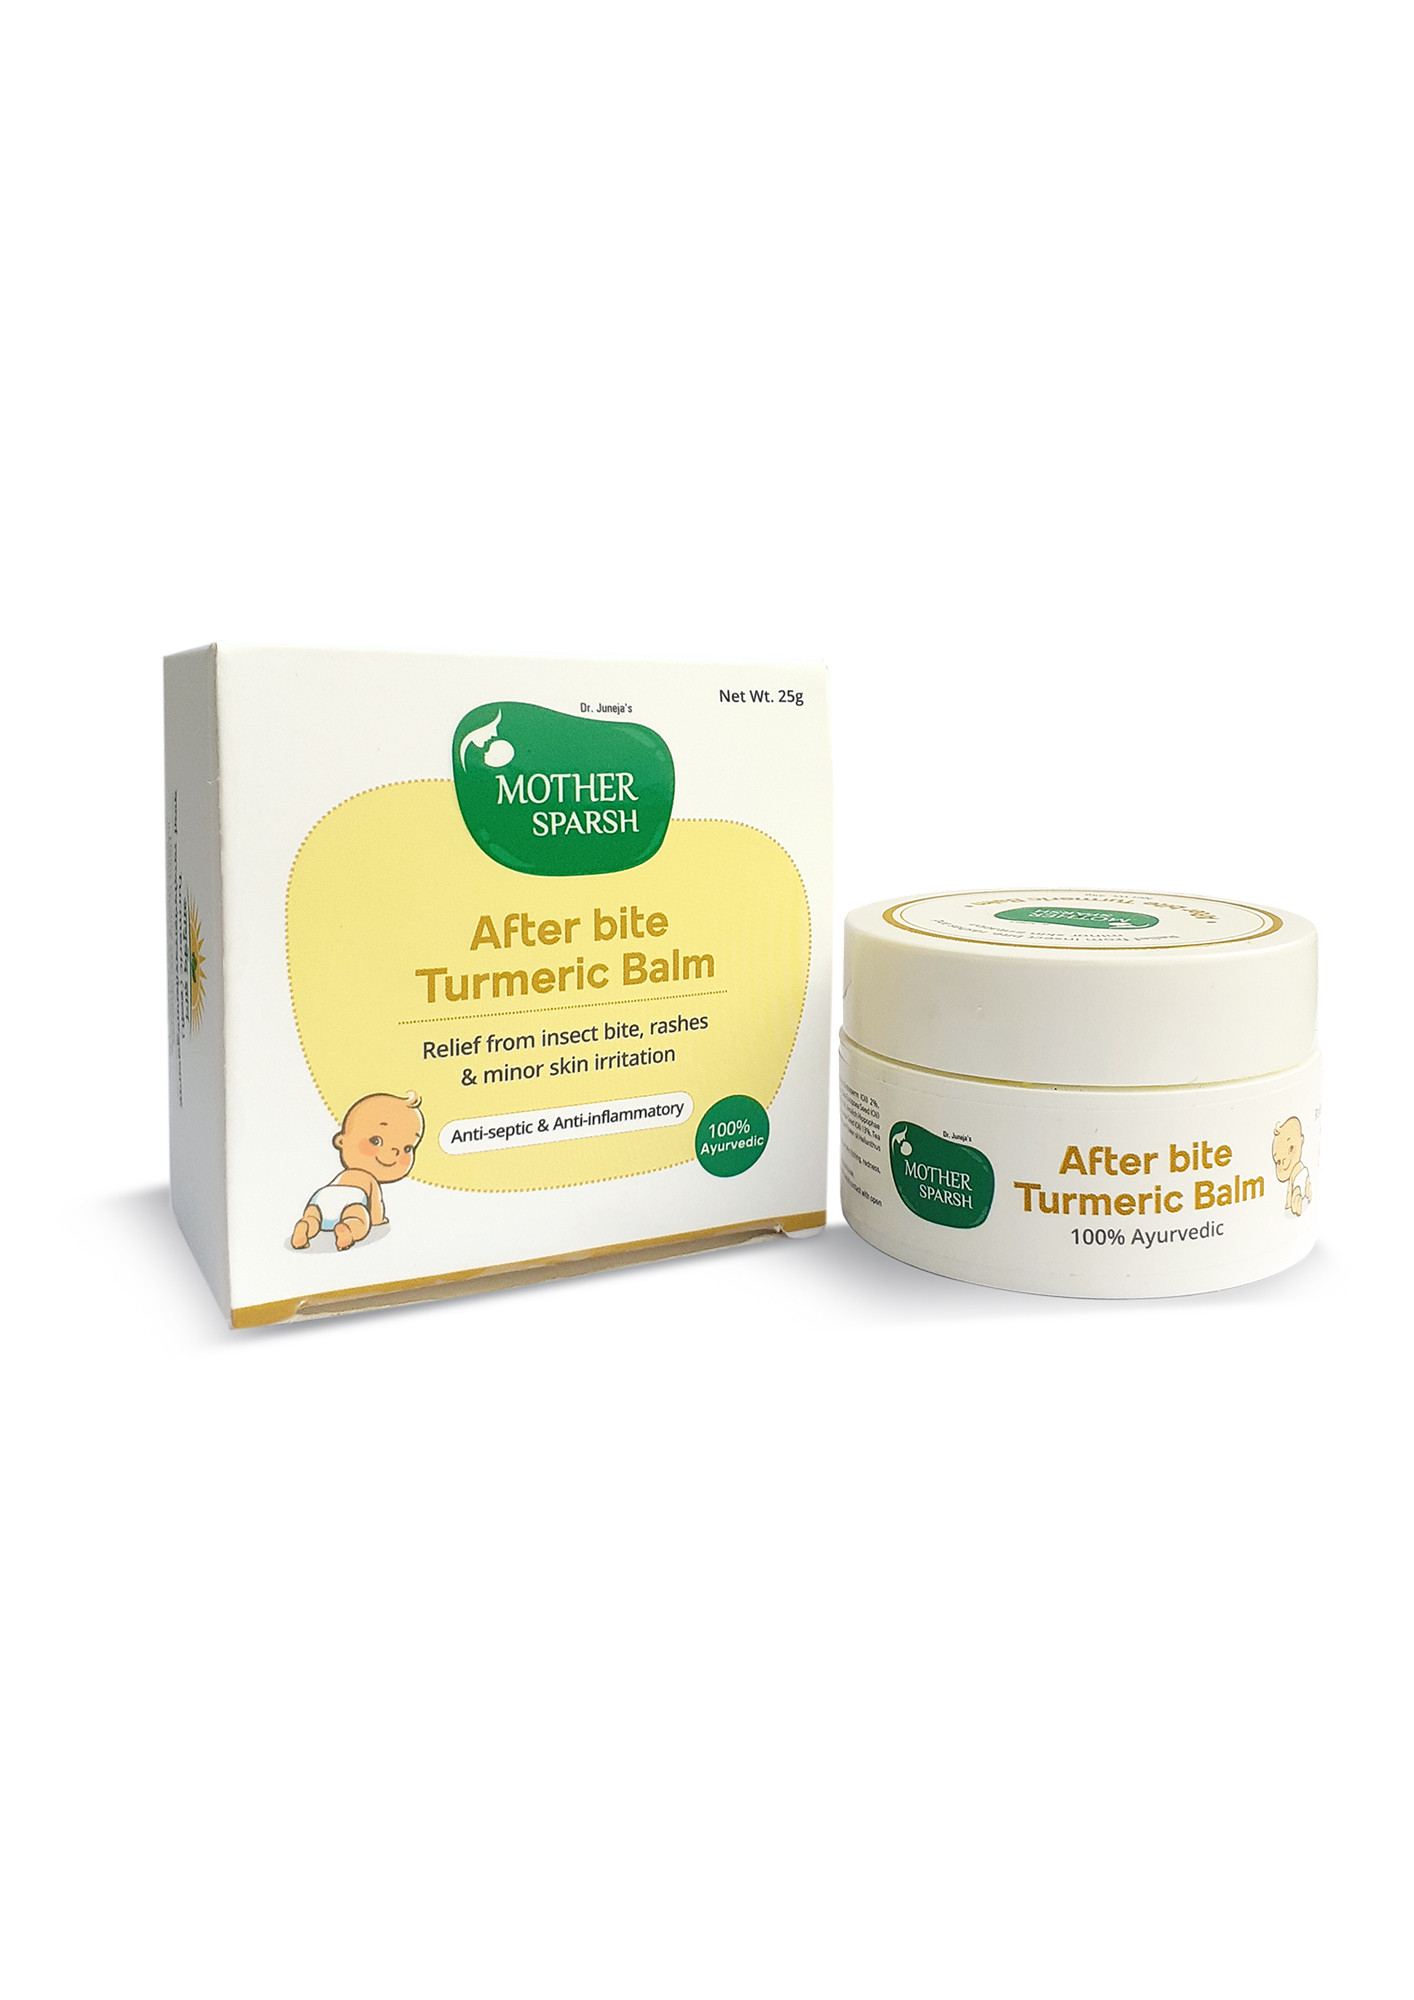 MOTHER SPARSH AFTER BITE TURMERIC BALM FOR RASHES AND MOSQUITO BITES, 100% AYURVEDIC, GENTLE SKIN ROLL-ON FORMULA, 25GM